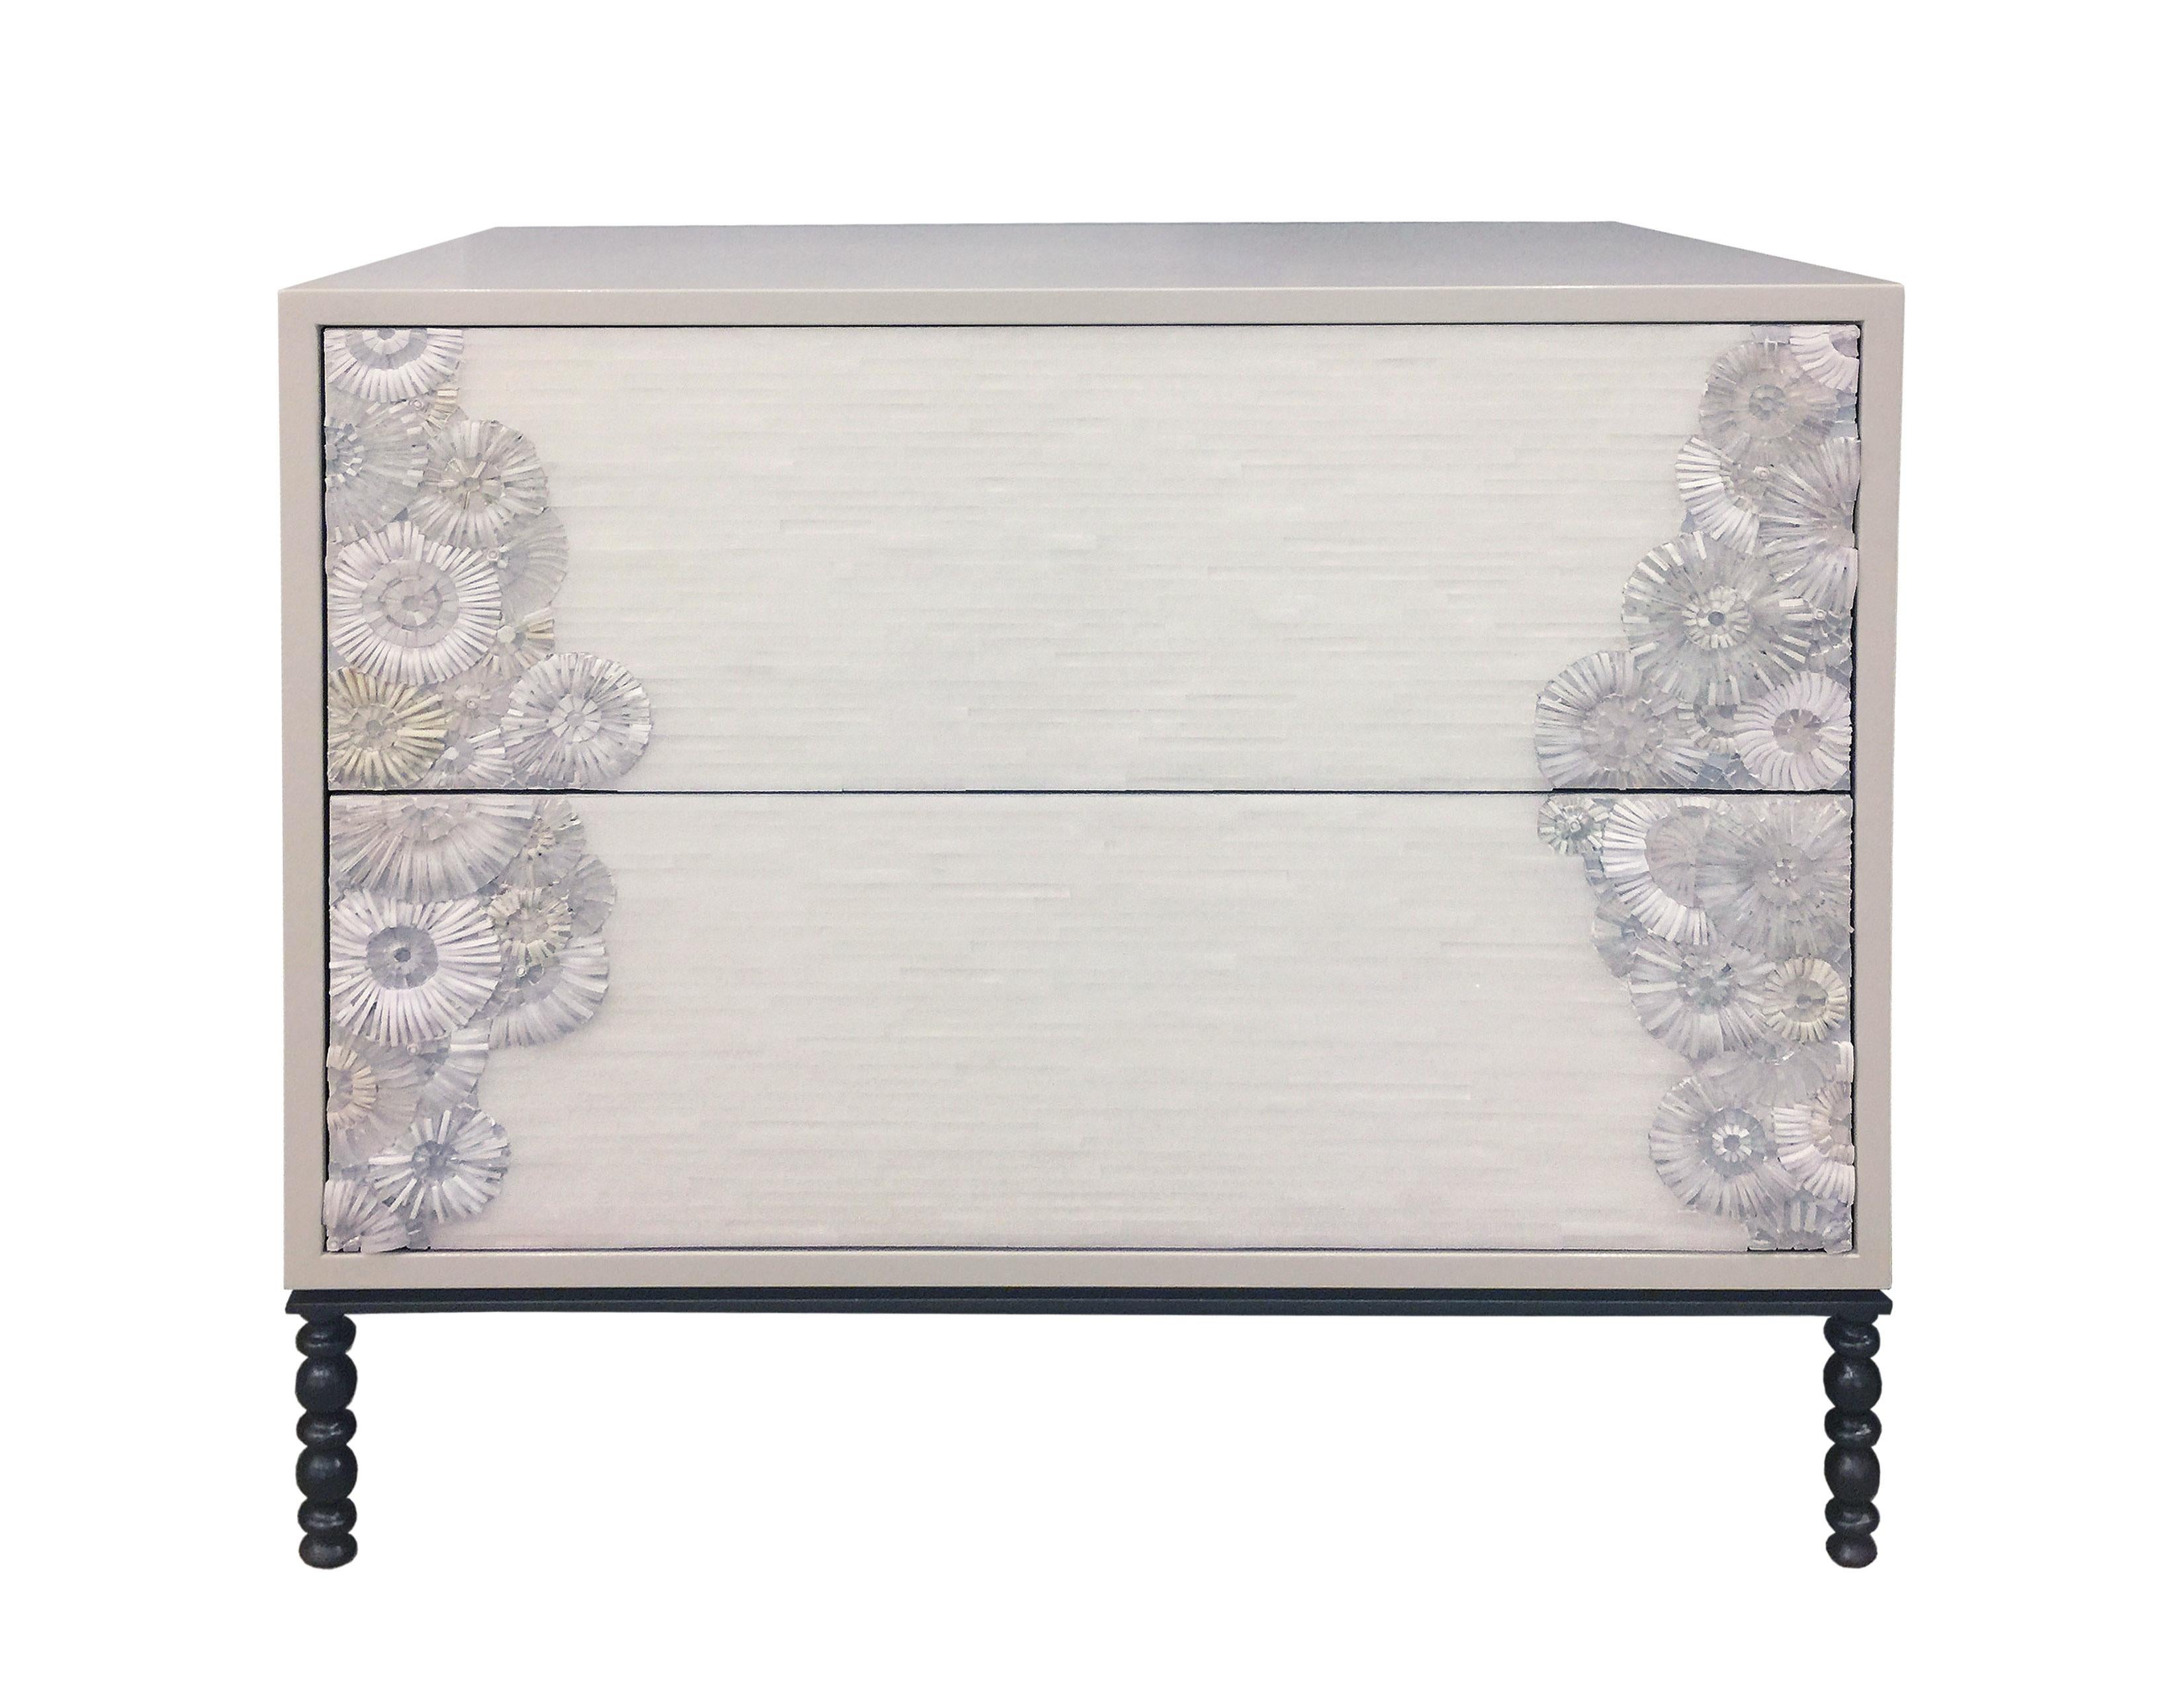 The Blossom nightstand by Ercole Home has a 2-drawer front, with Misty Gray lacquer wood finish.
Handcut glass mosaic in variety shades of white and ivory decorate the surface in Blossom and stipe mosaic pattern.
The decorative metal base is in Dark